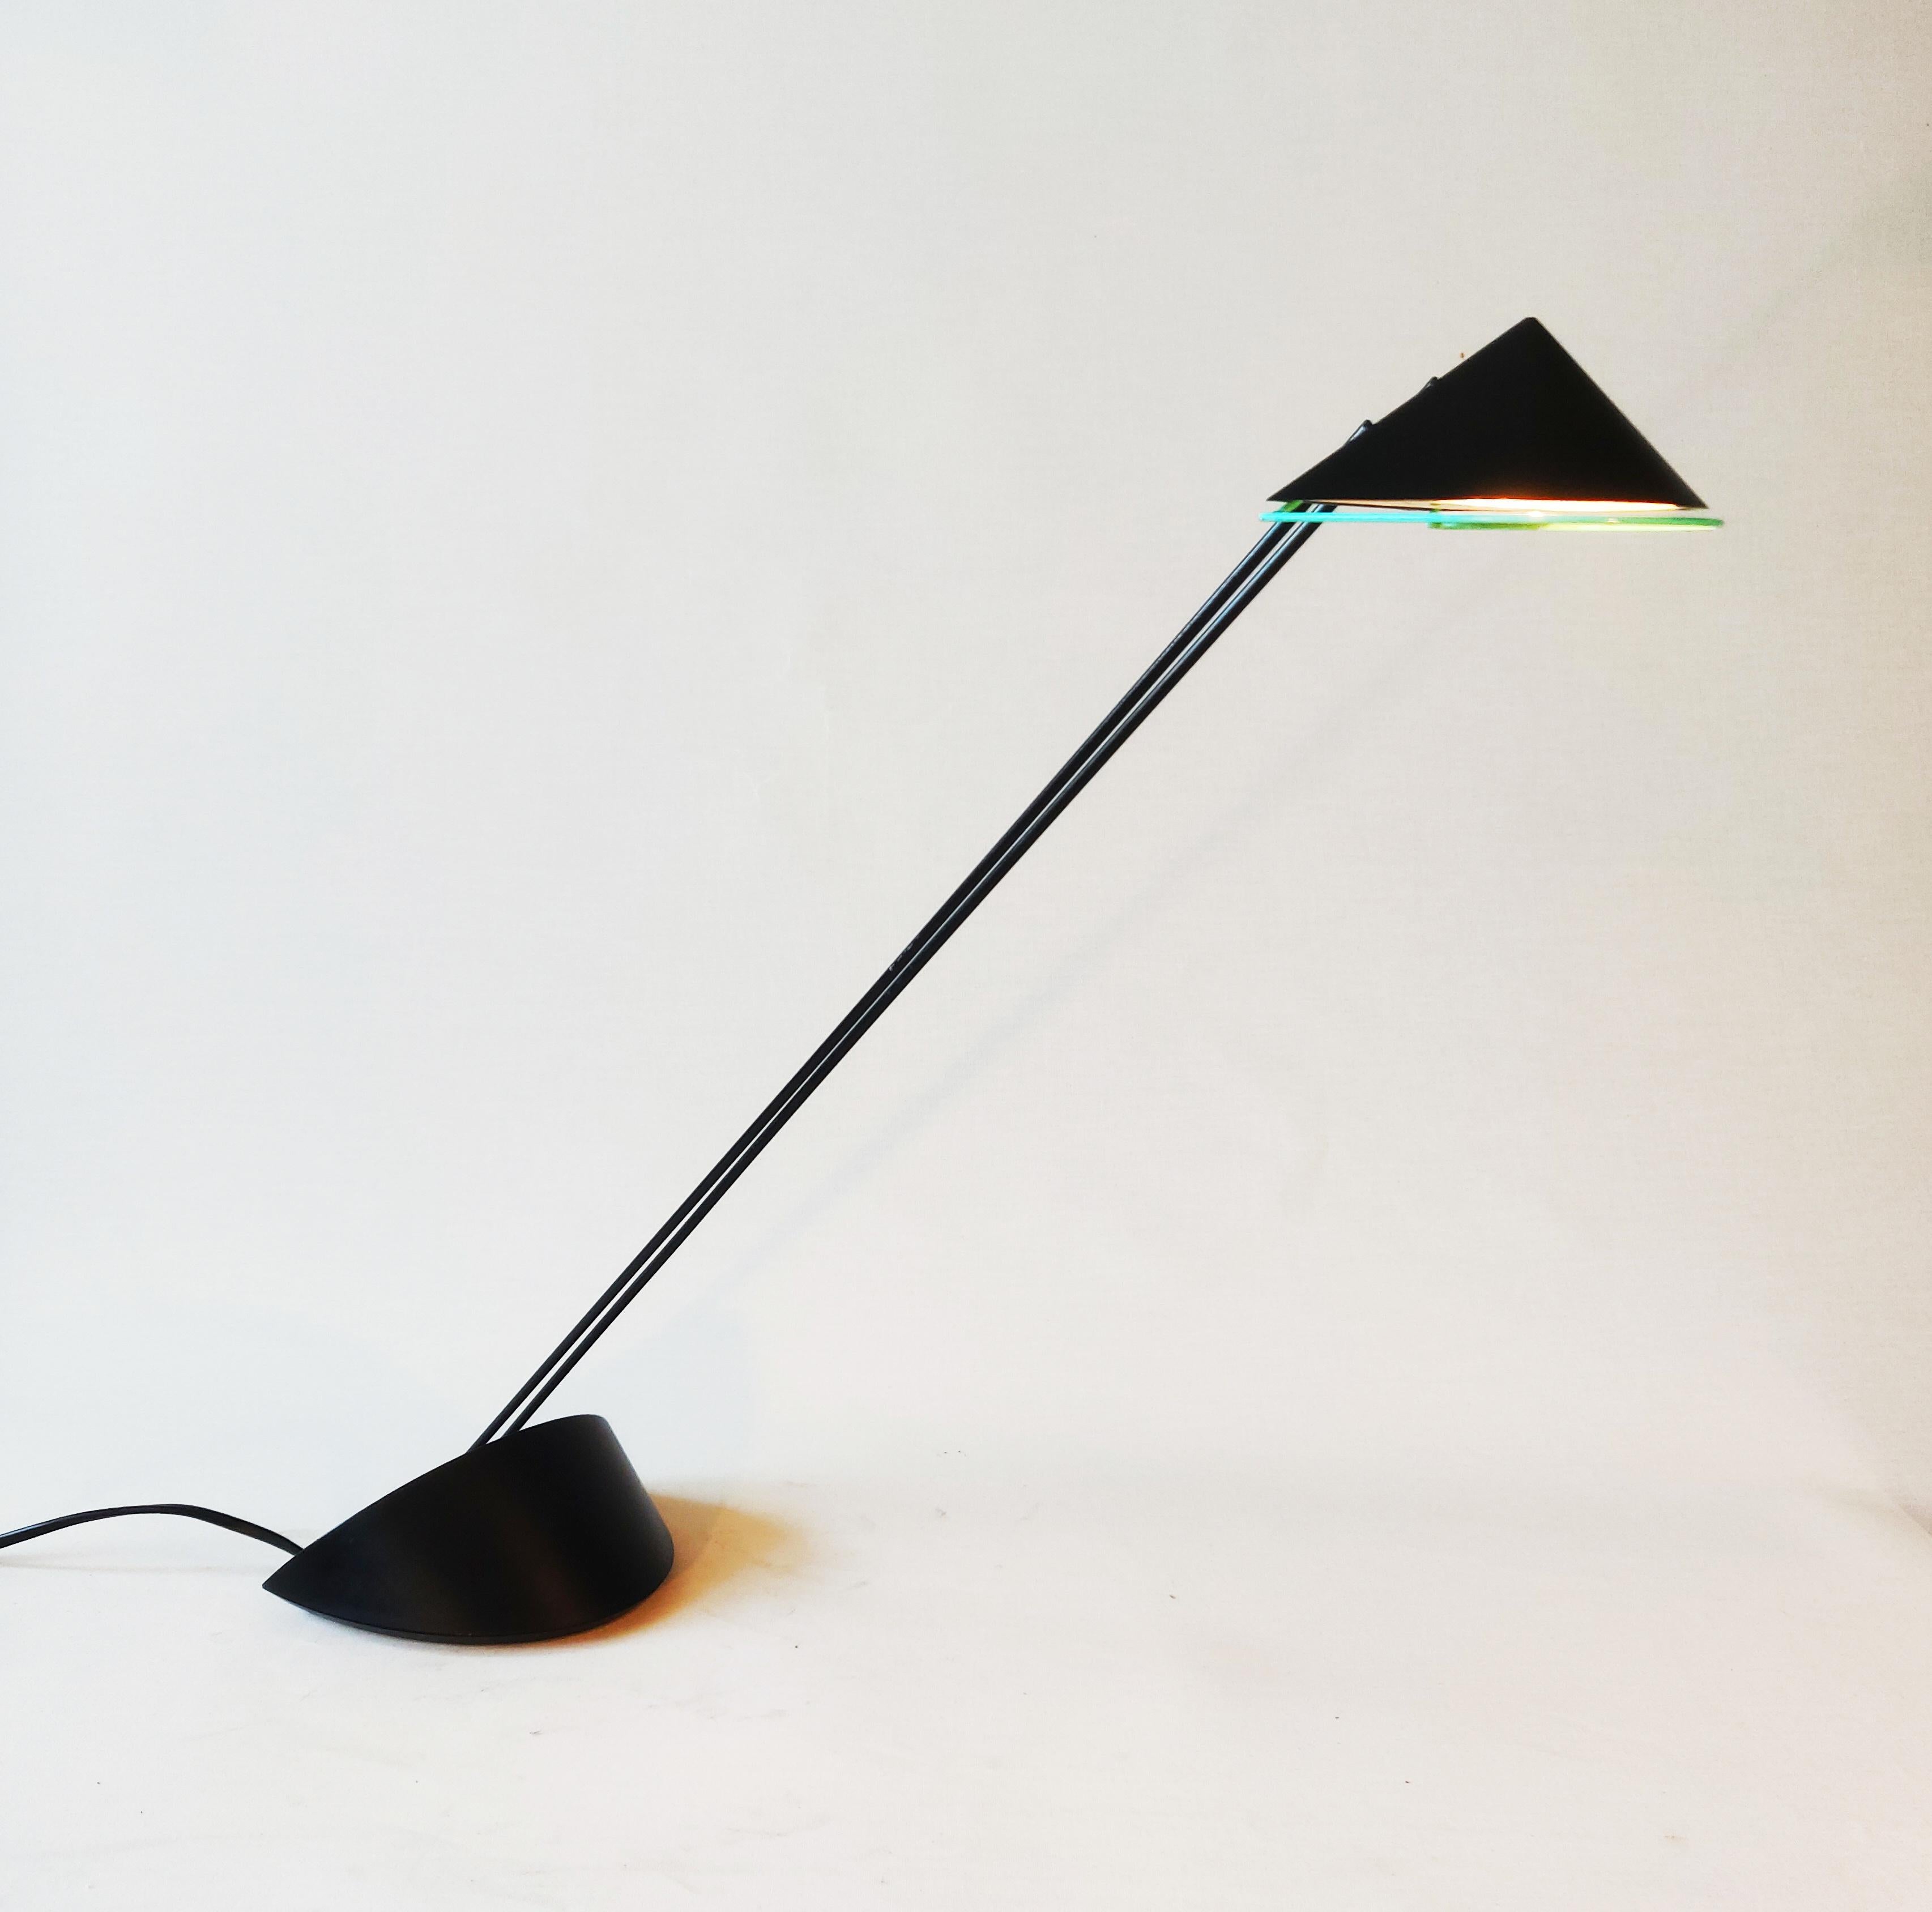 This is a Priola design lamp from the 80s. The lamp was designed by Dutch designer Ad van Berlo and produced by Indoor Amsterdam. The lamp has a pastel green border under the shade and also the on and off button is pastel green. The lamp has real